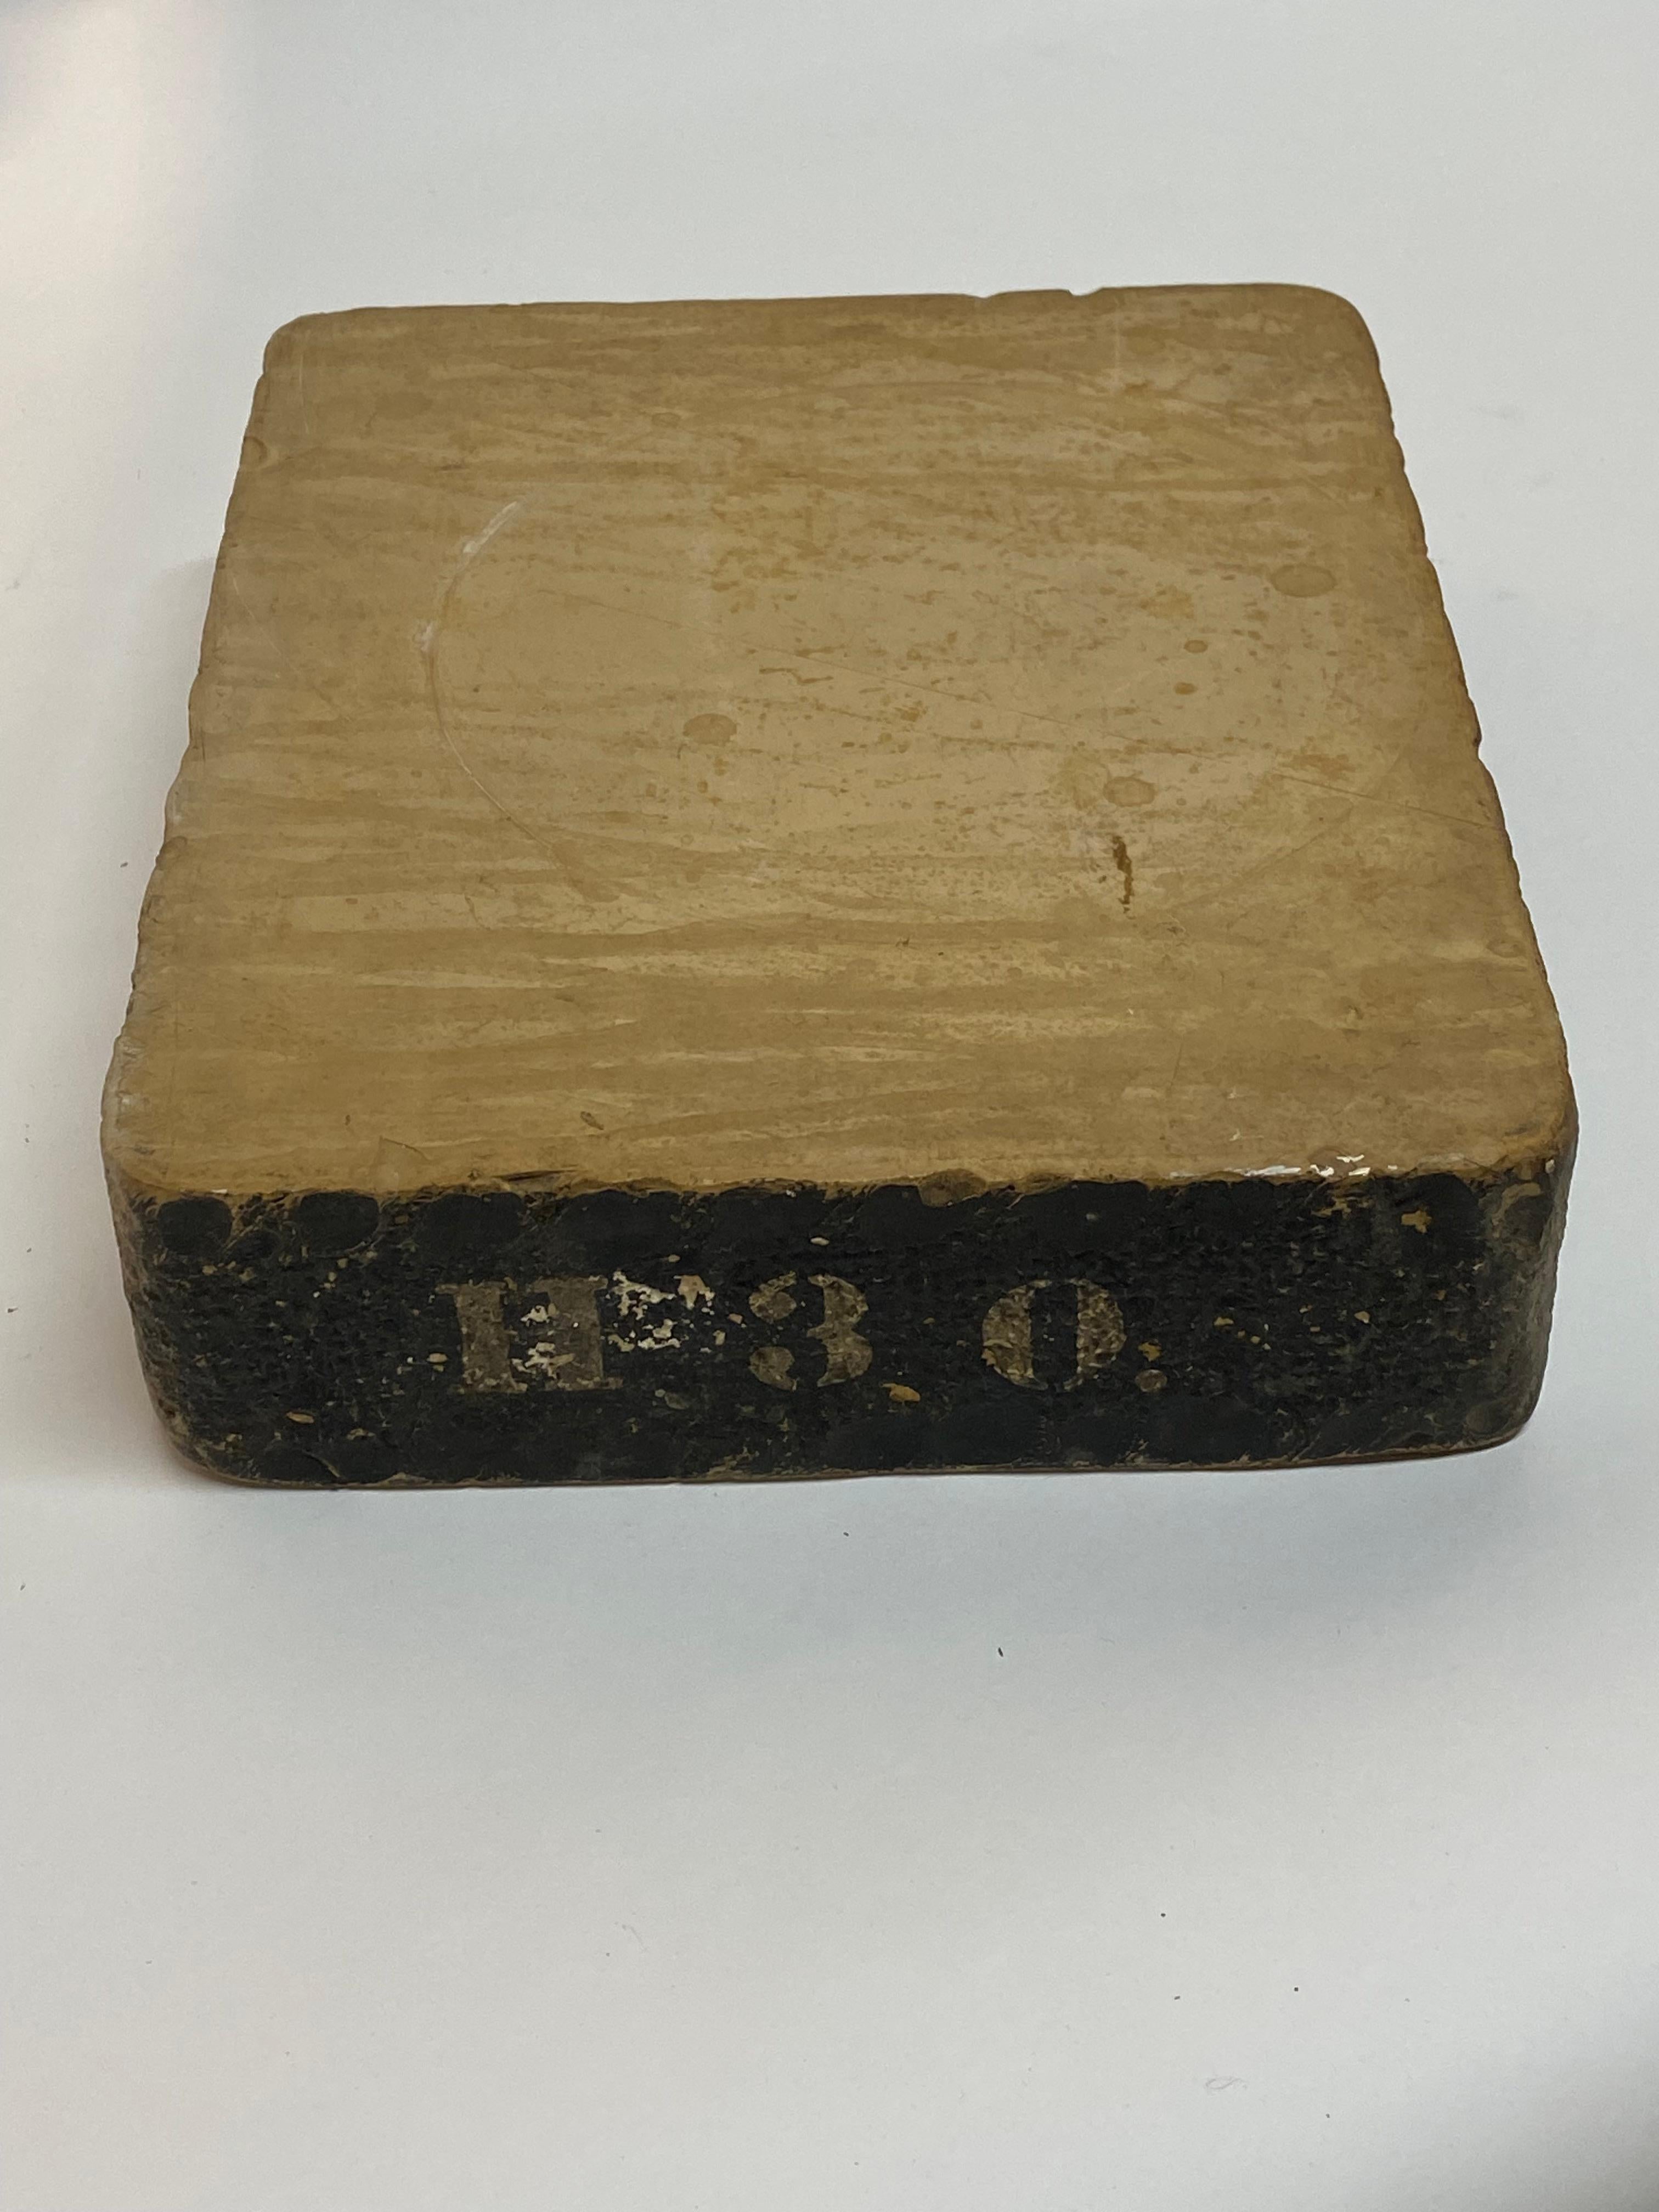 Nineteenth Century solid limestone lithographers stone. Two smooth printing surfaces with a rough exterior. Stenciled graphics on the edge, H 3 0. Limestone was used more commonly than glass, granite or marble because it was less likely to dull a